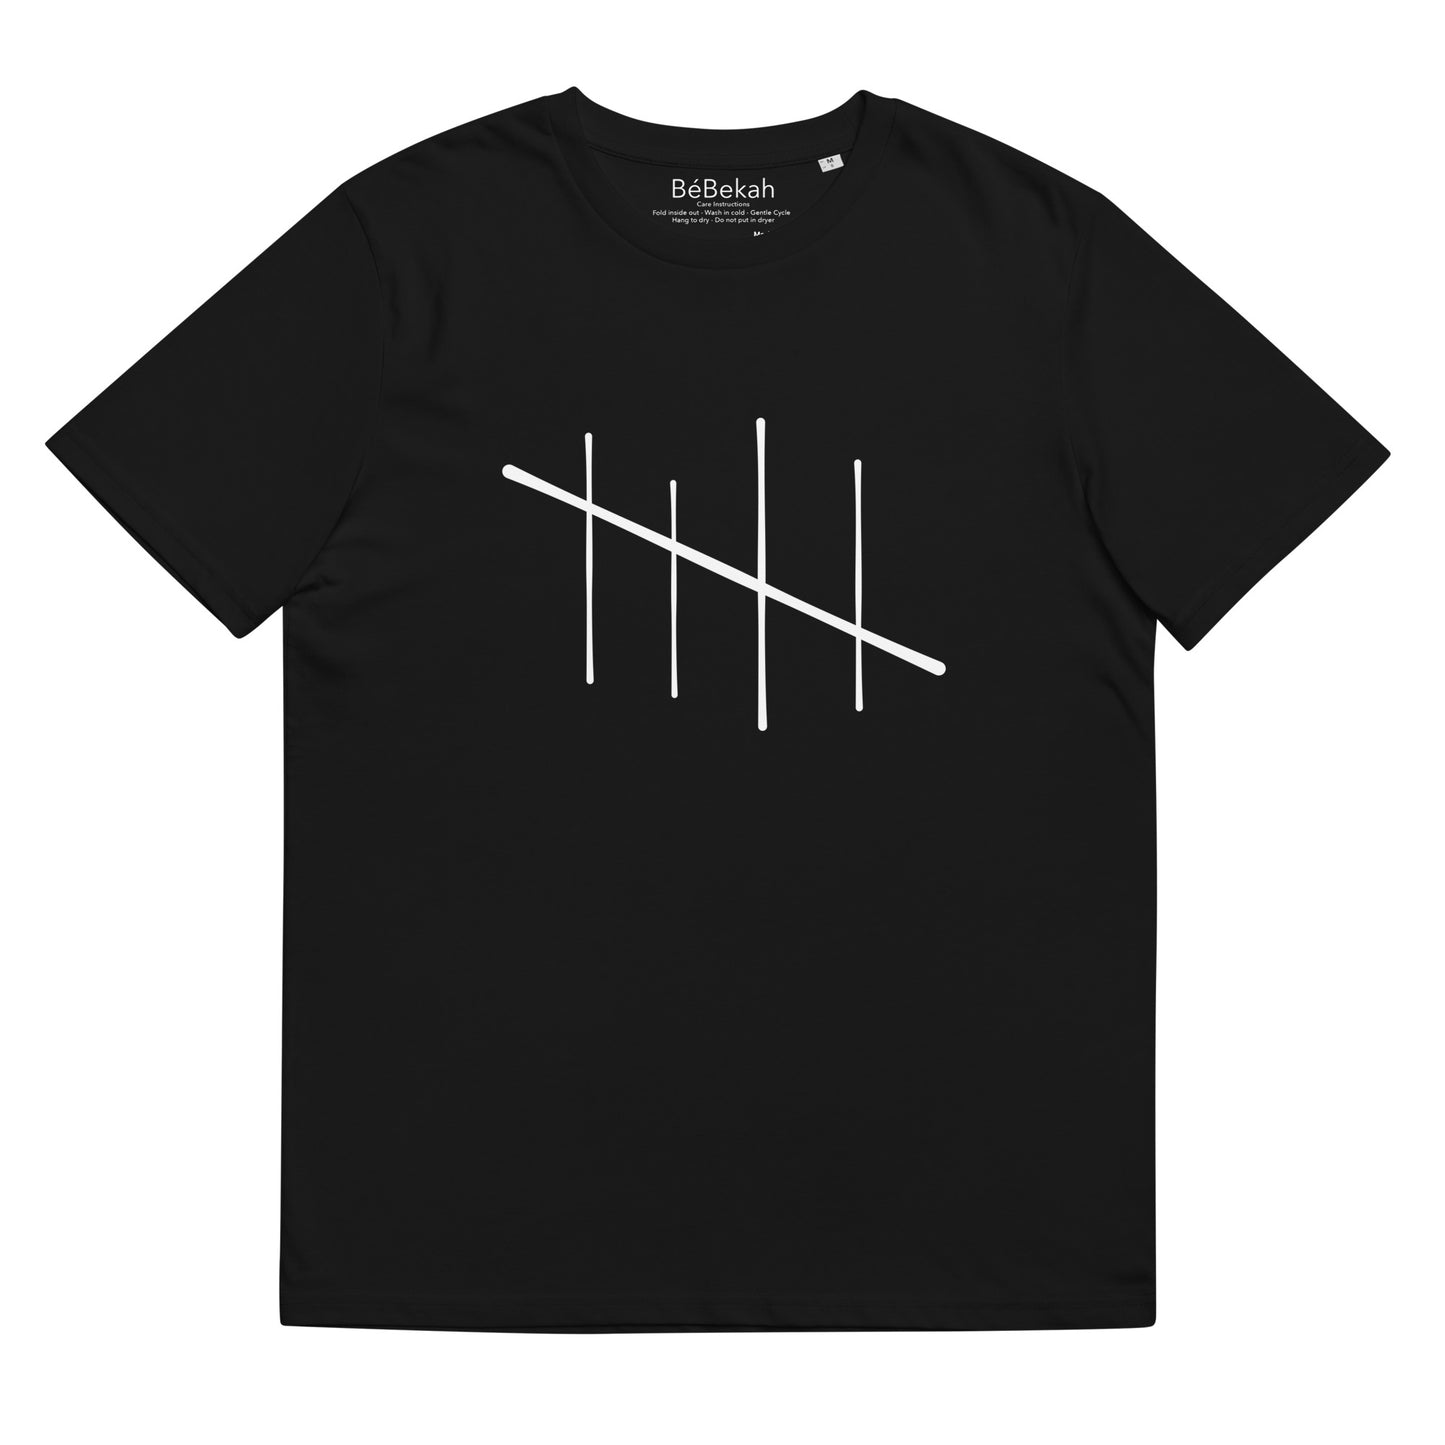 Load image into Gallery viewer, 5 Sticks Unisex T-Shirt
